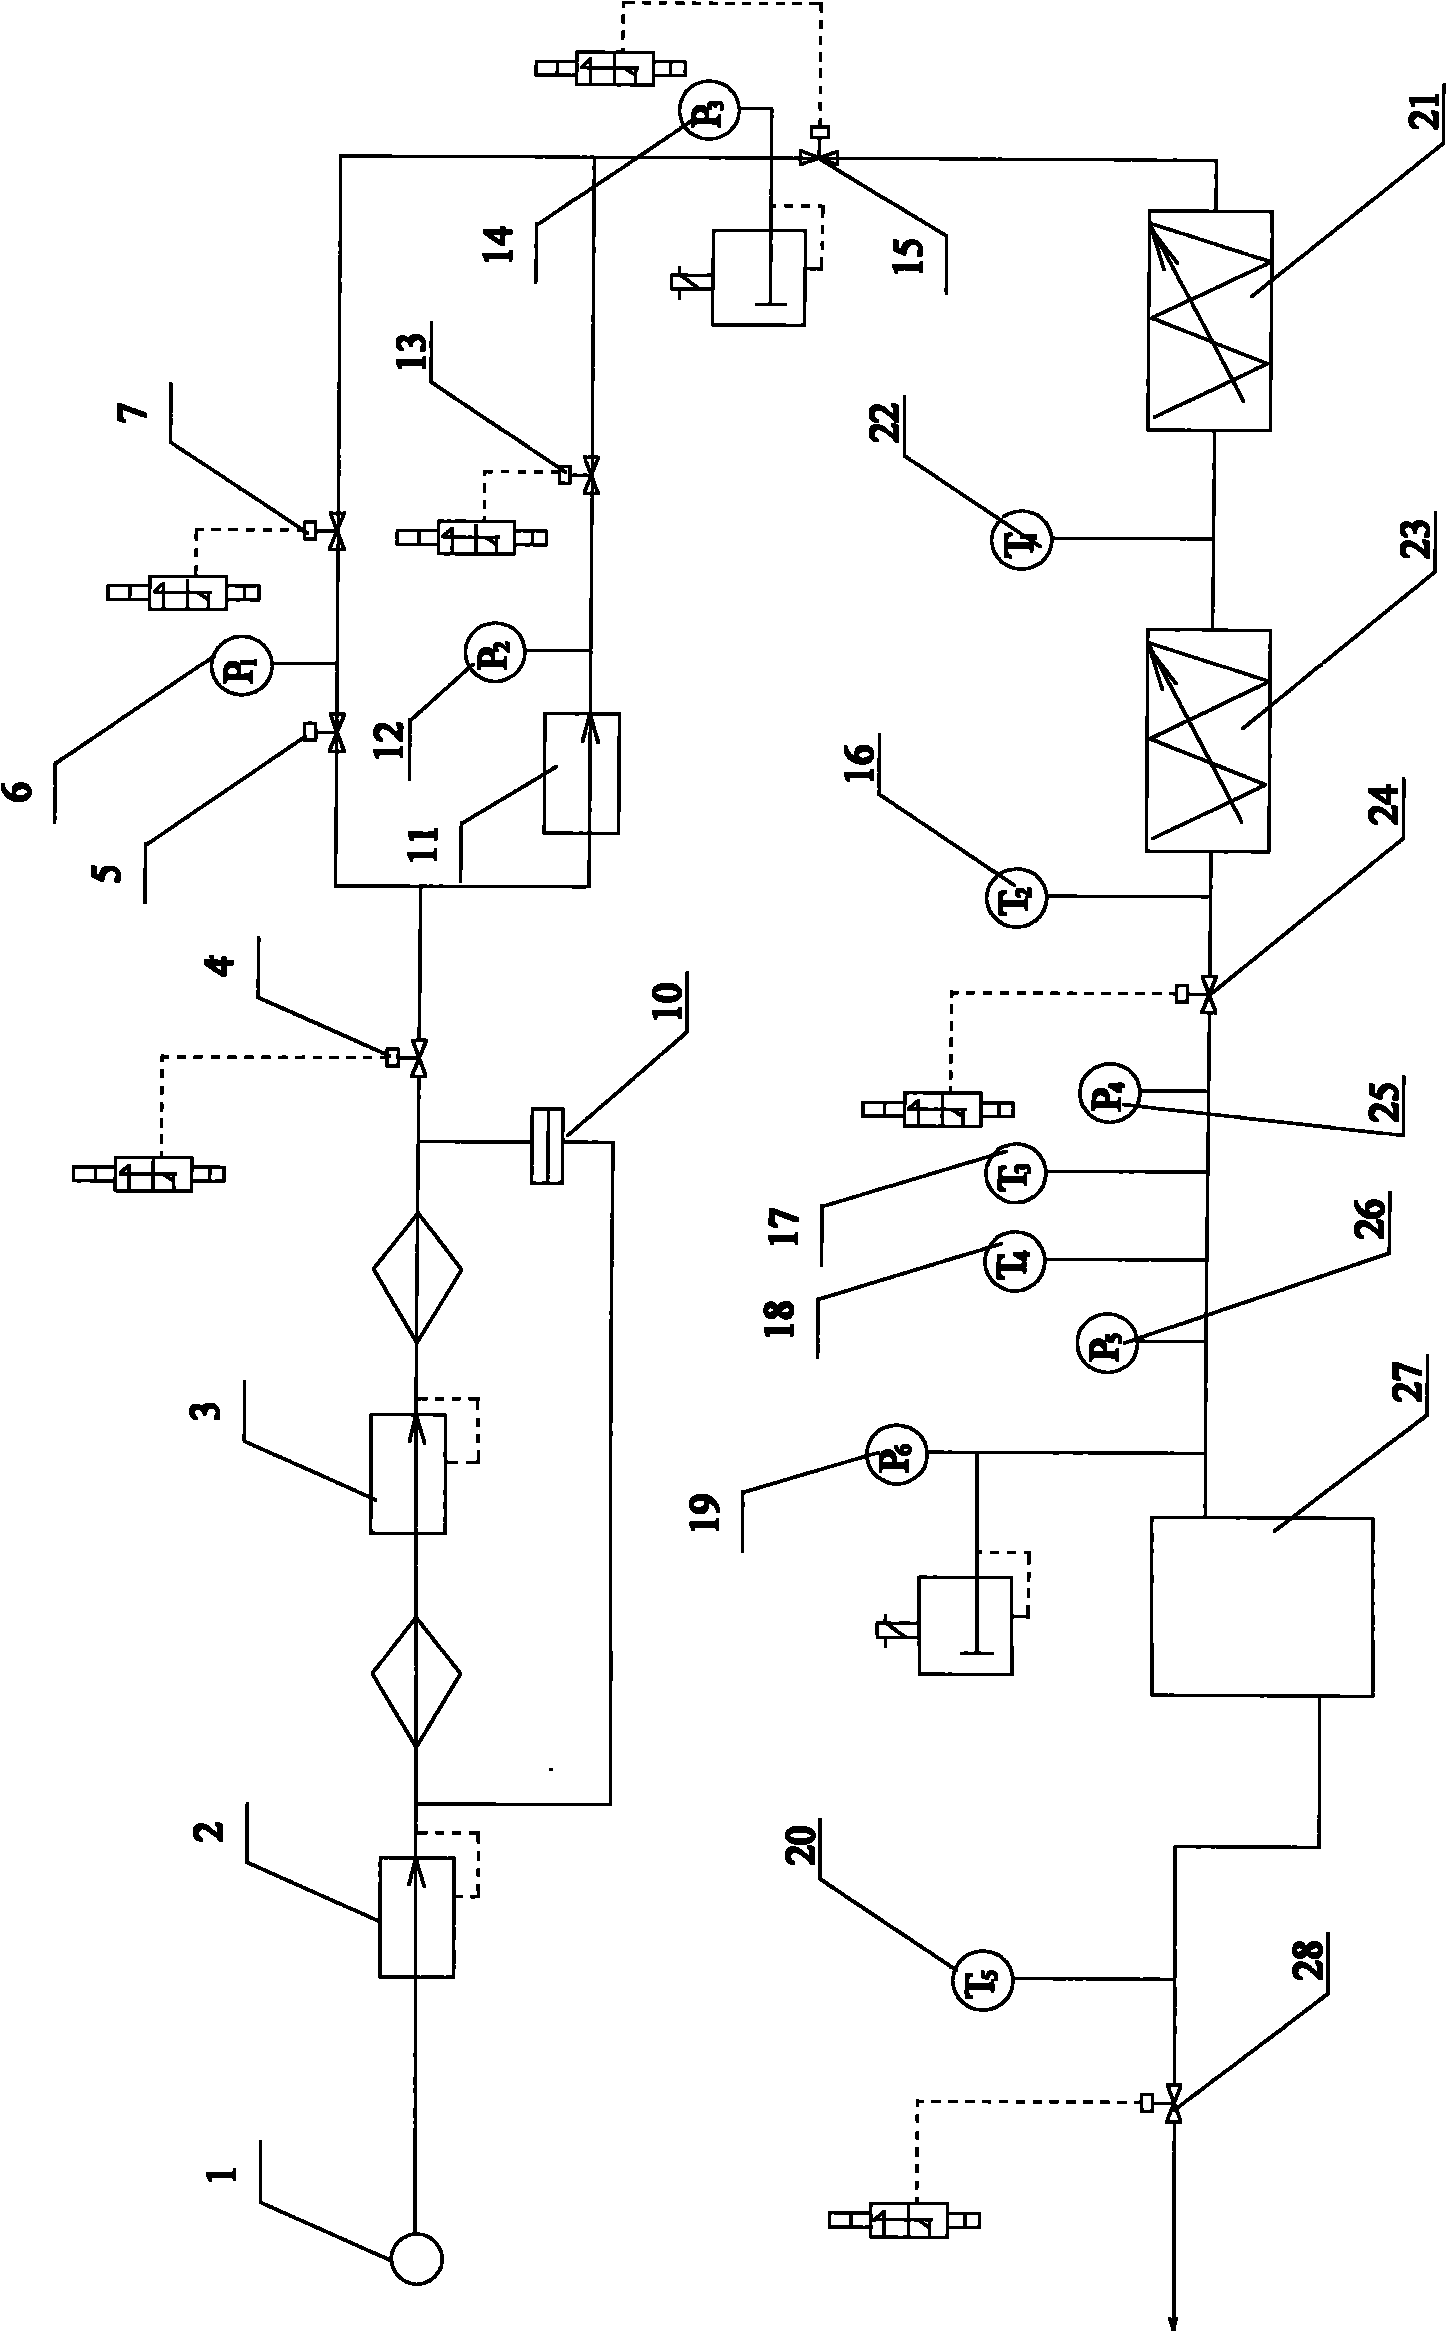 Computer test control system for pressure alternating test of air-air intercooler